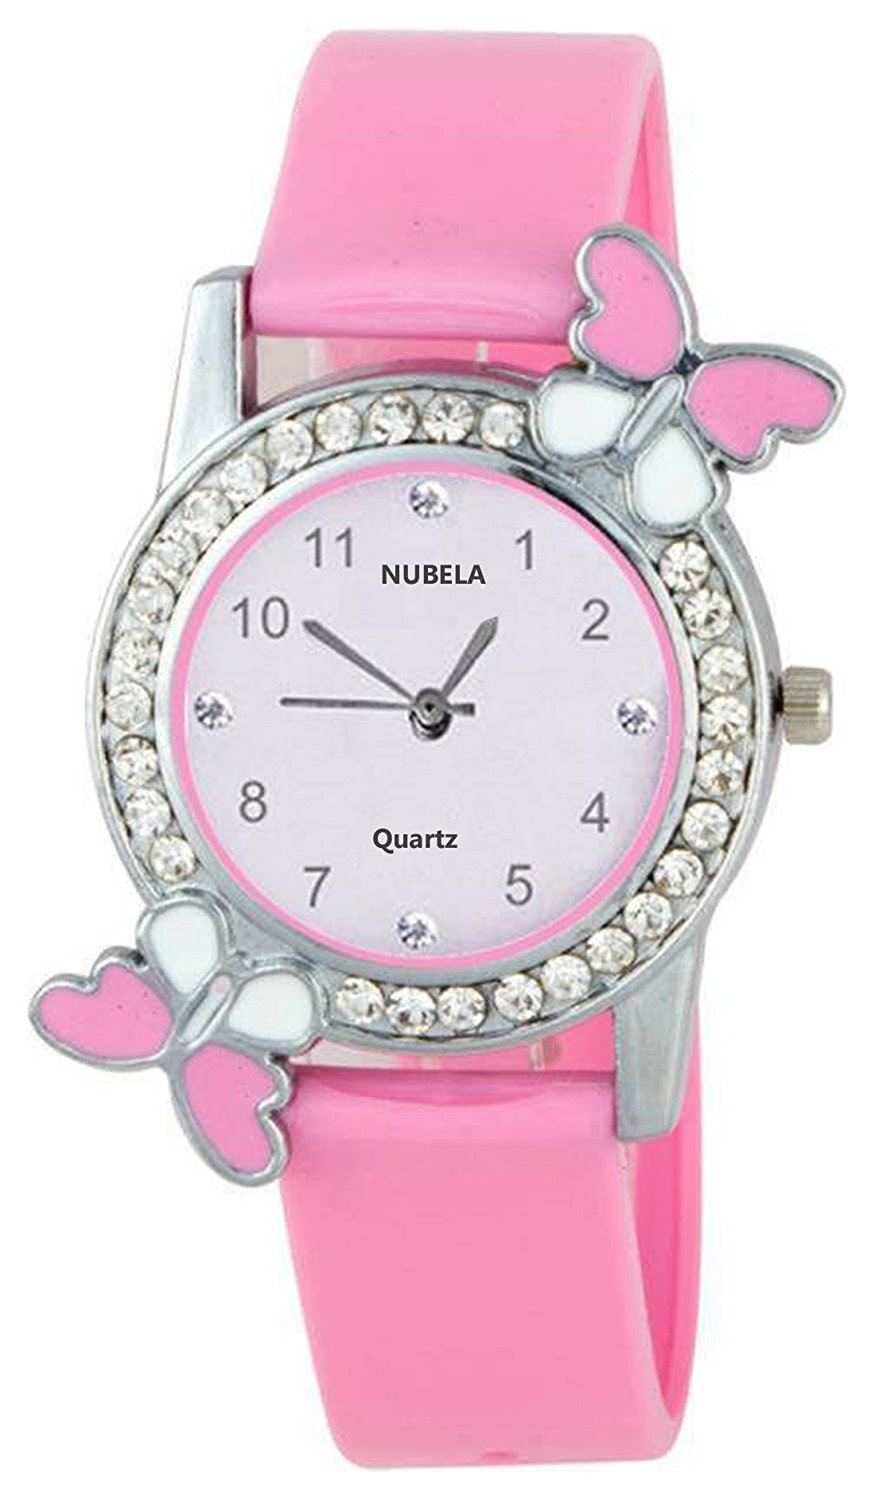 Nubela Analogue White Dial Girl's Watch Online at Best Prices in India |  Shop.GadgetsNow